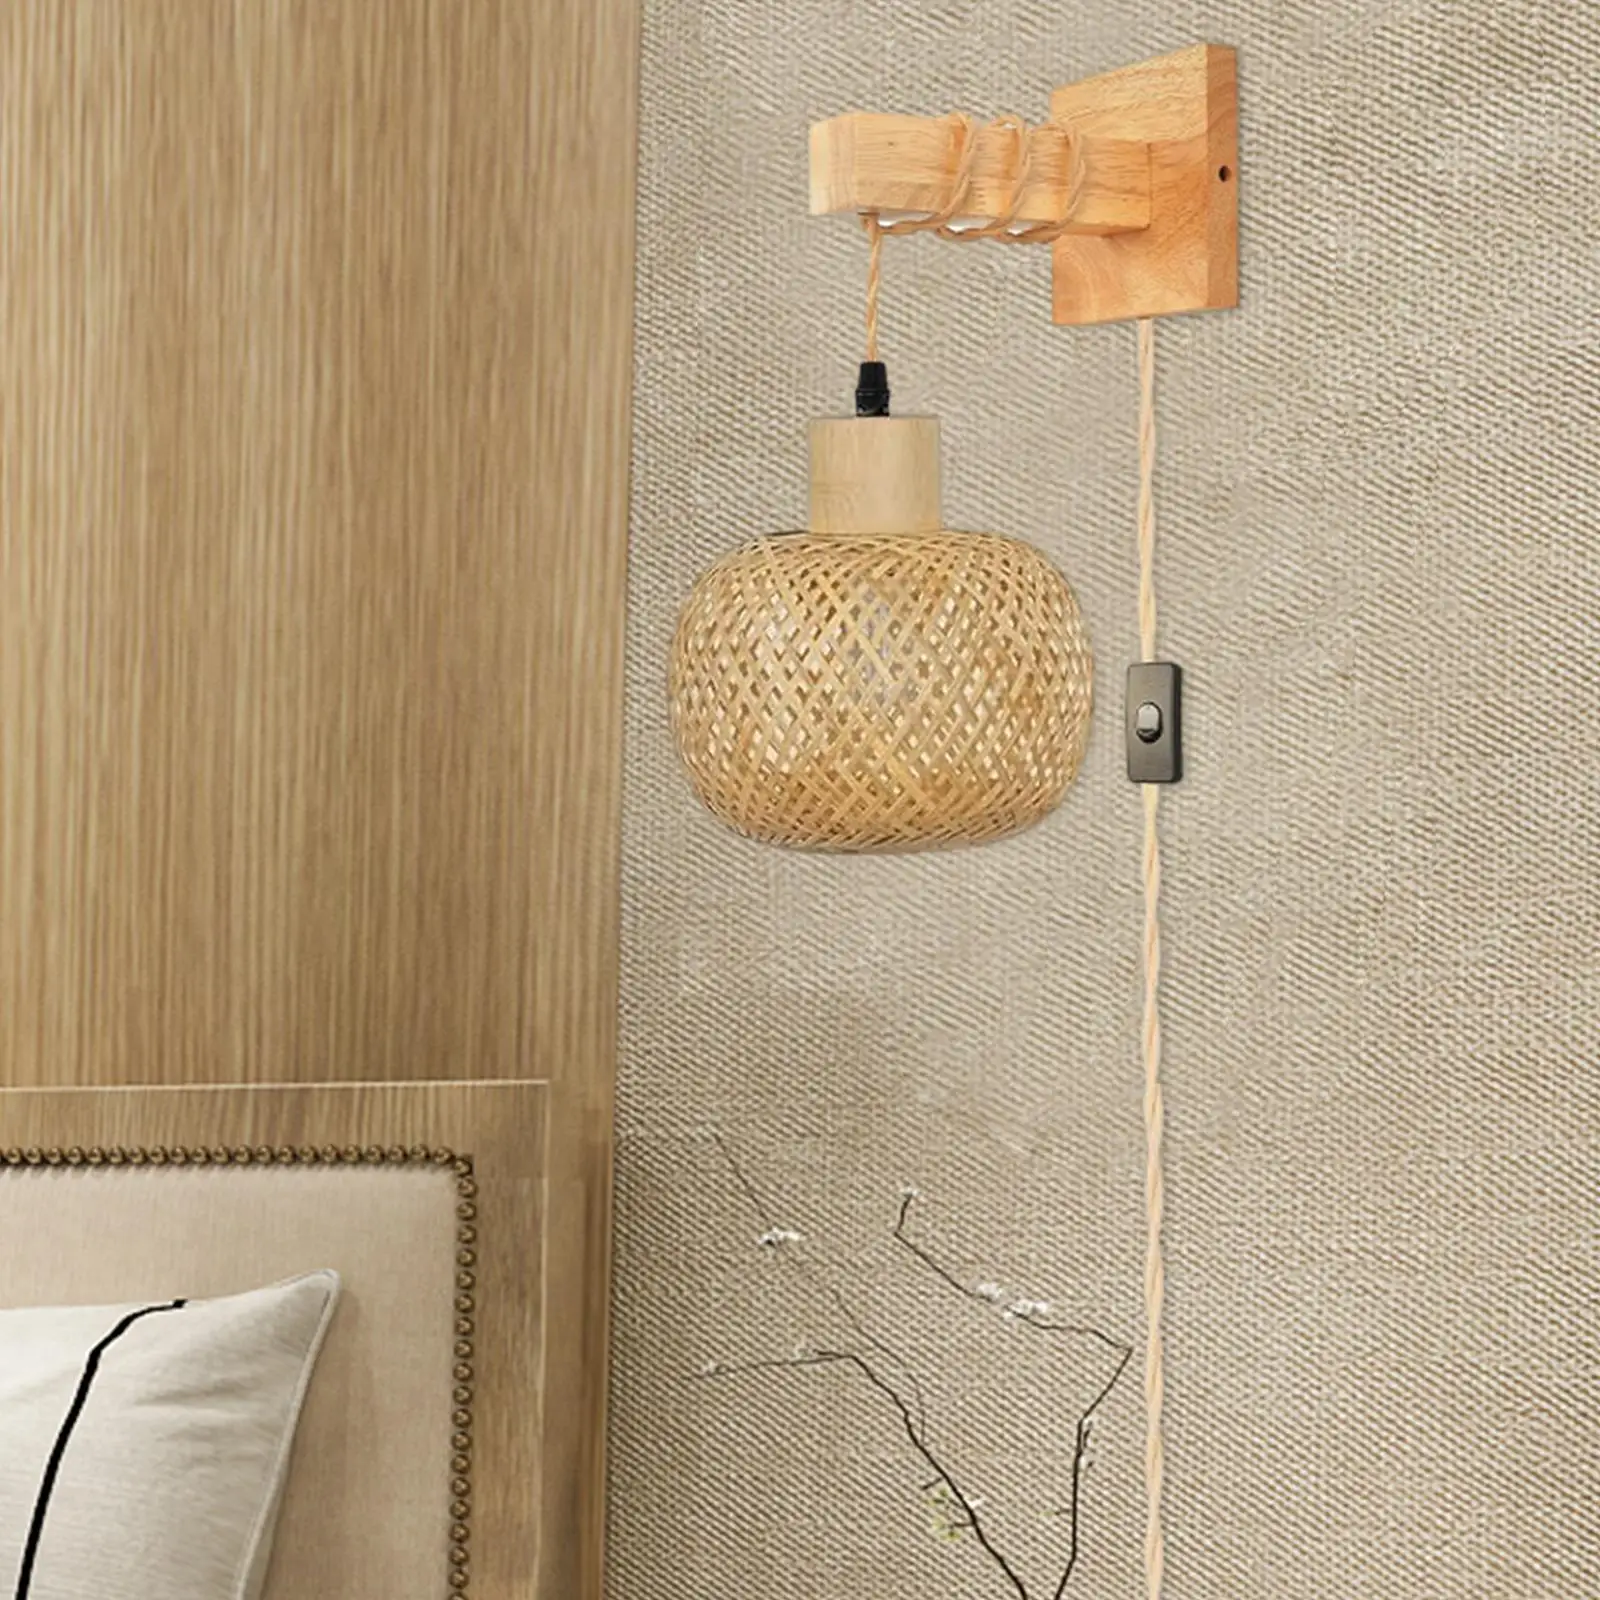 Bamboo Wall Sconce E26 Base Rustic Wall Mount Sconce Decorative Plug in Pendant Light for Hallway Home Bedroom Farmhouse Kitchen